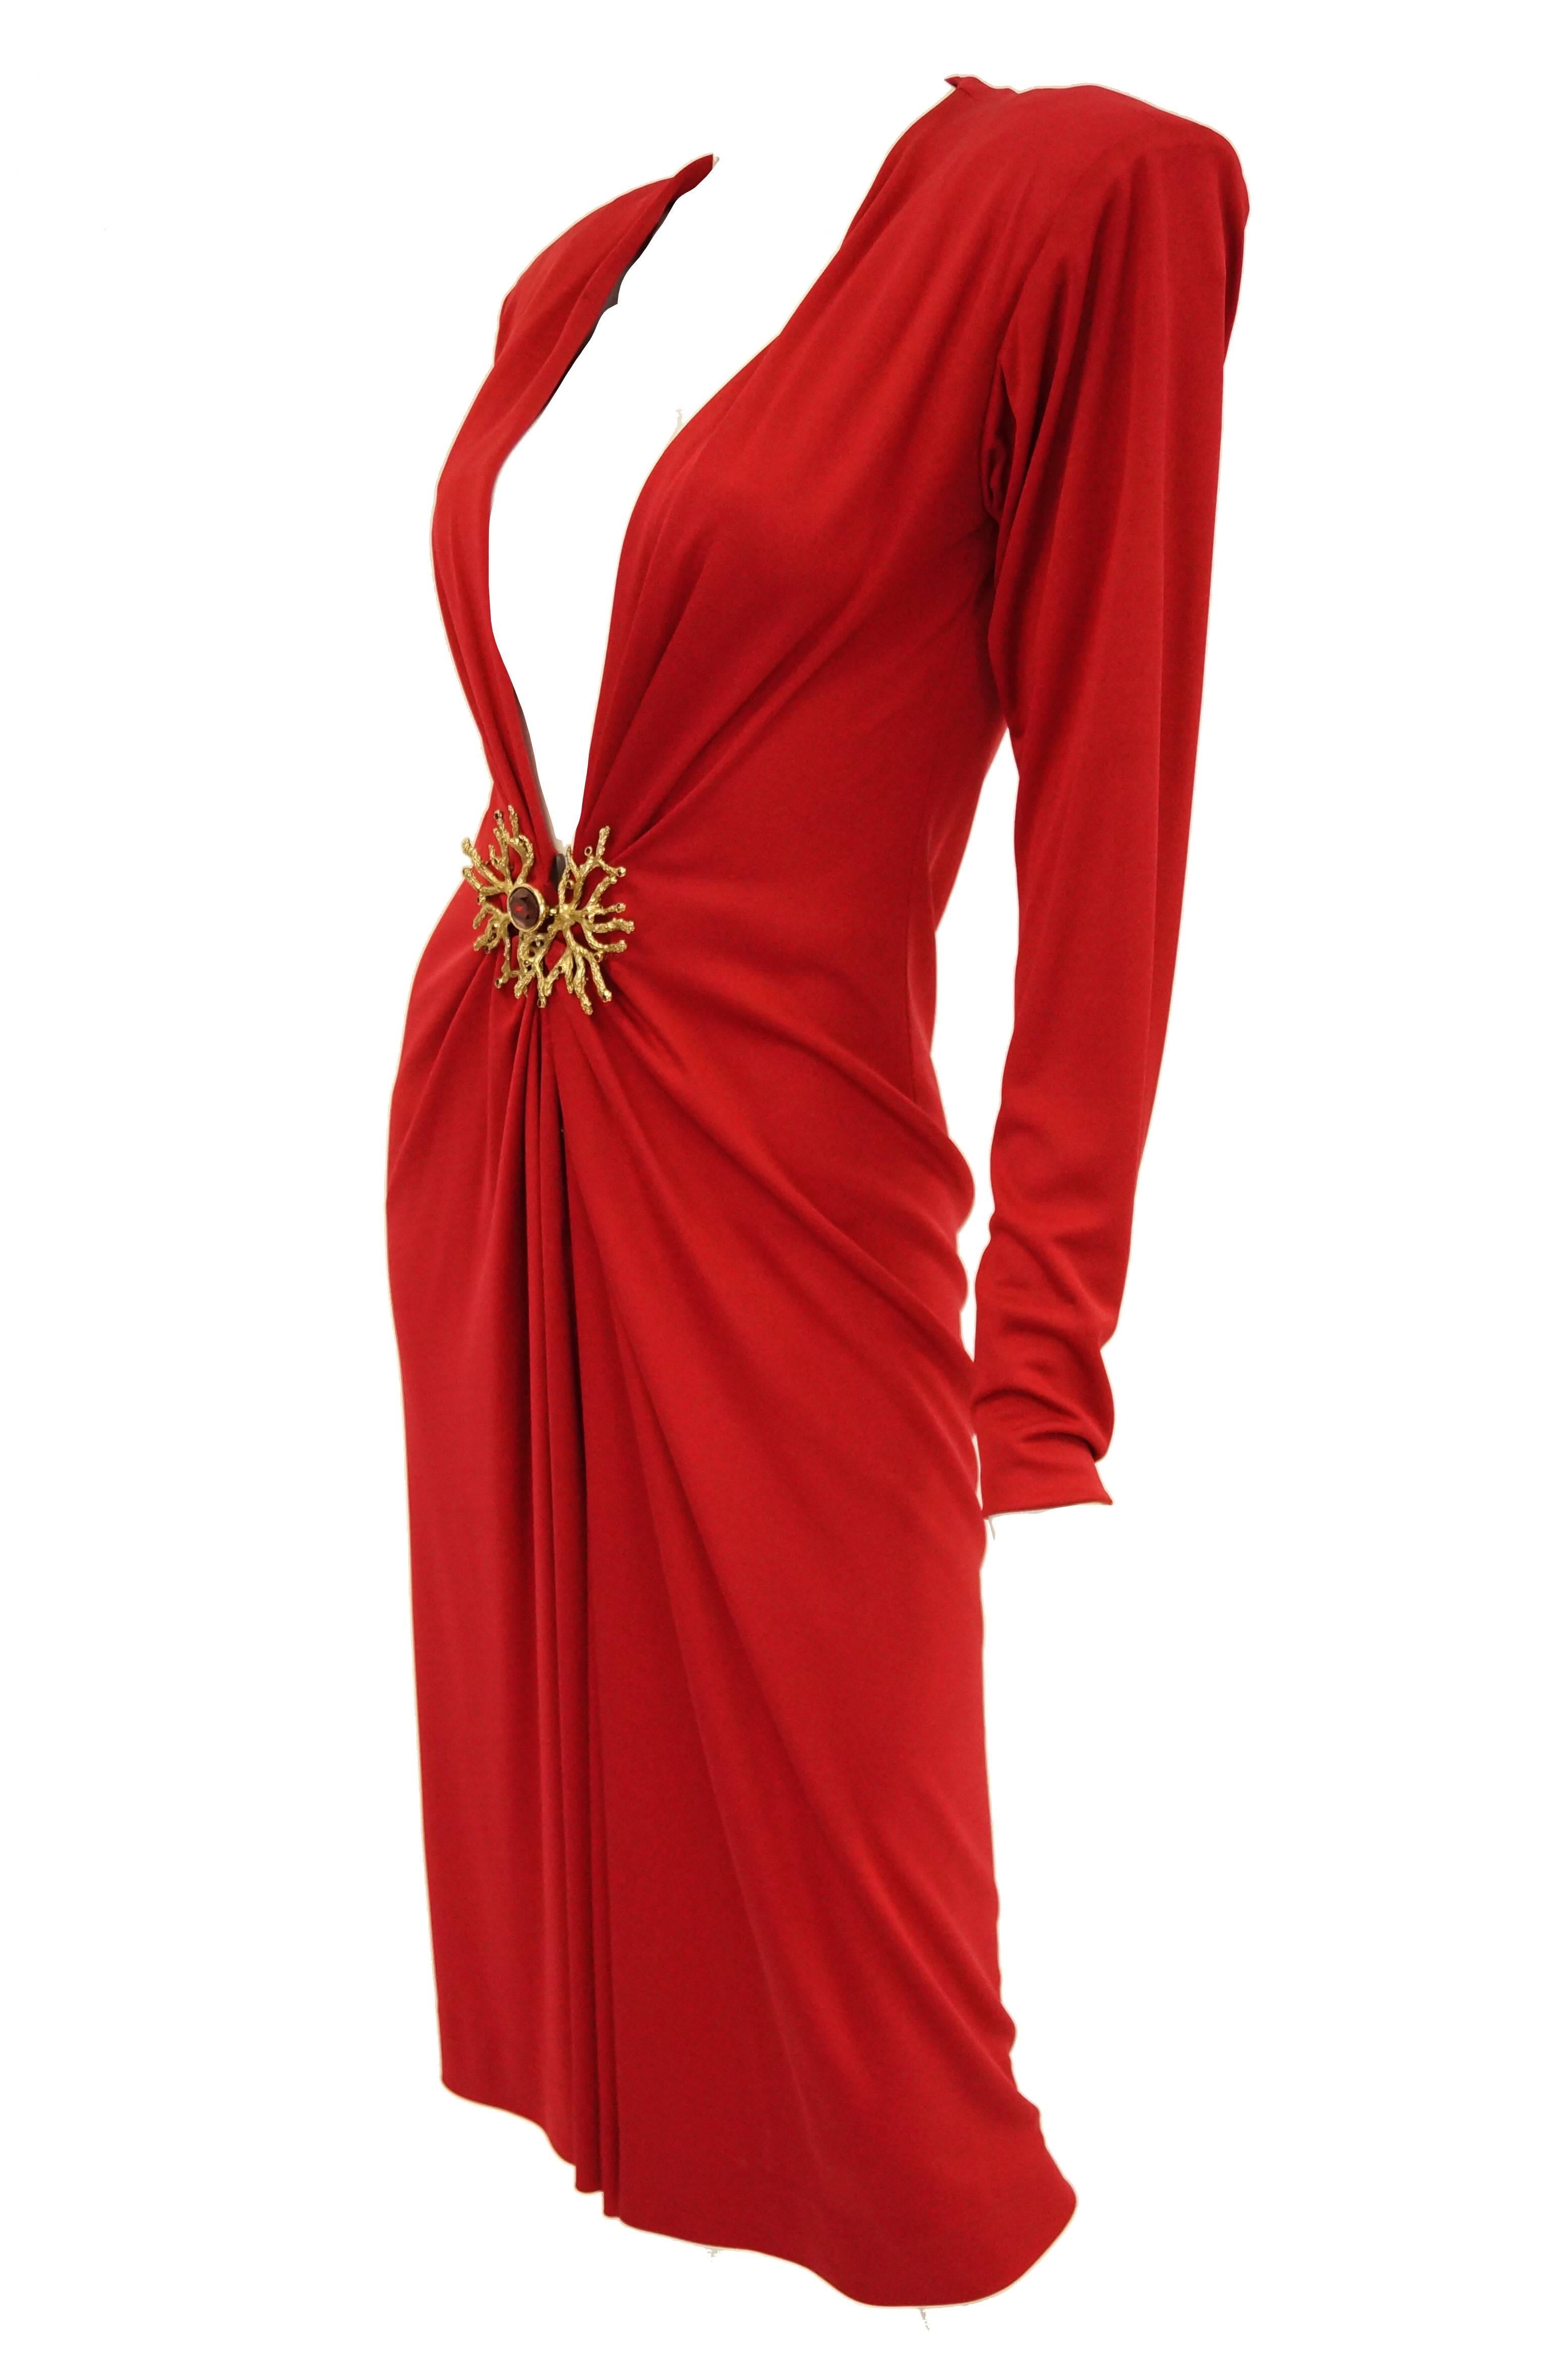 Yves Saint Laurent Silk Jersey Red Plunge Front Dress, 1980s 1